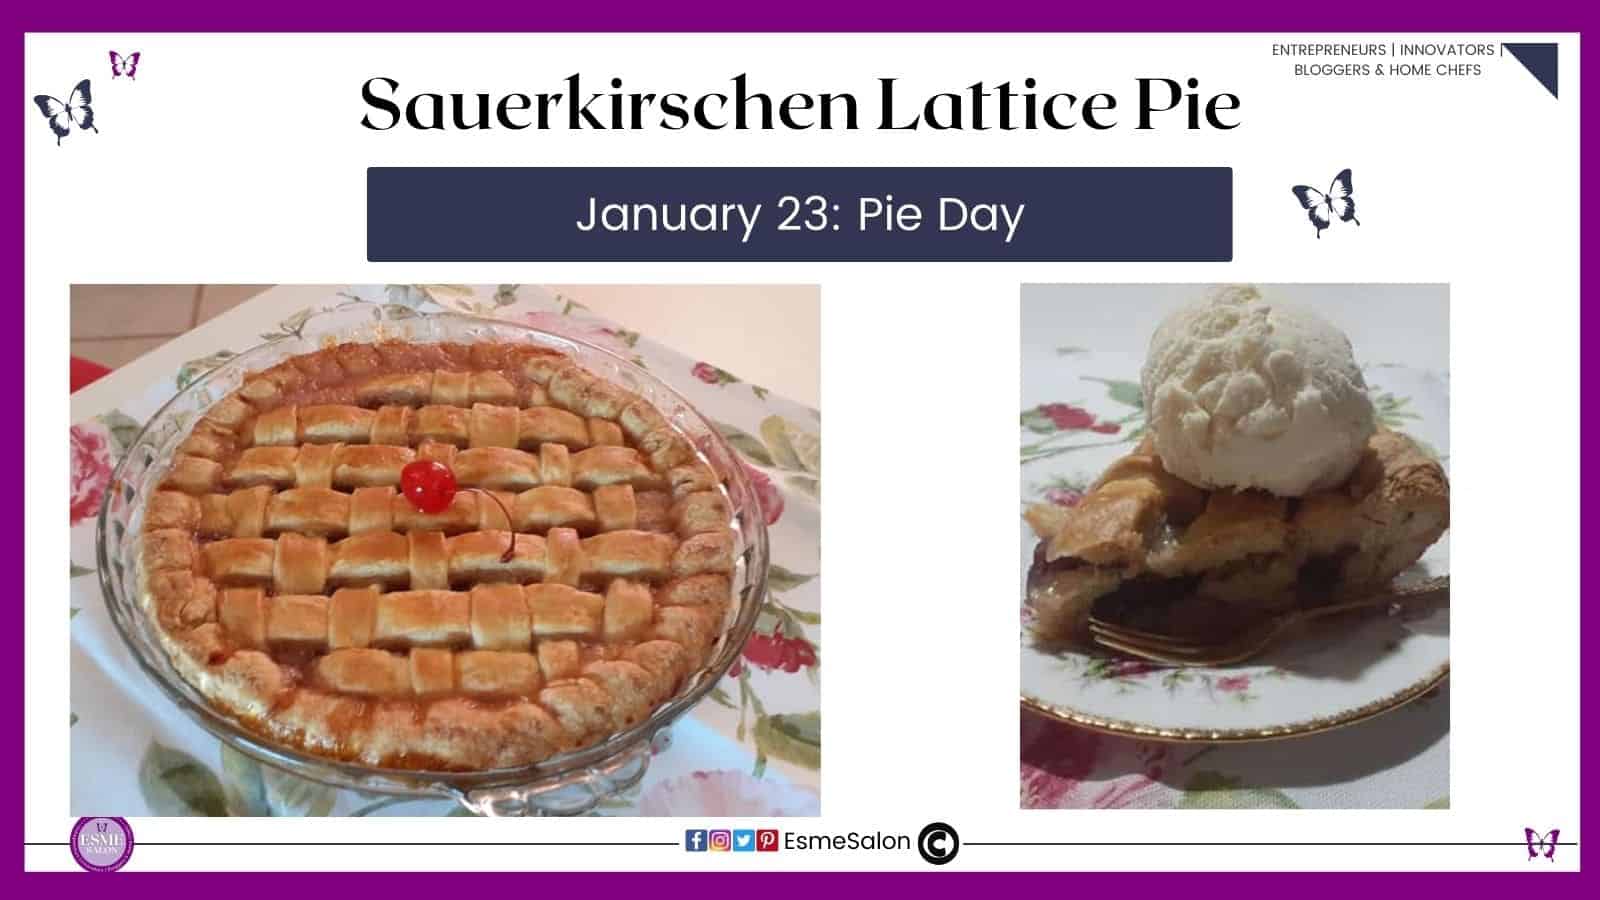 an image of a Sauerkirschen Lattice Pie with a cherrie as well as a slice topped with ice cream